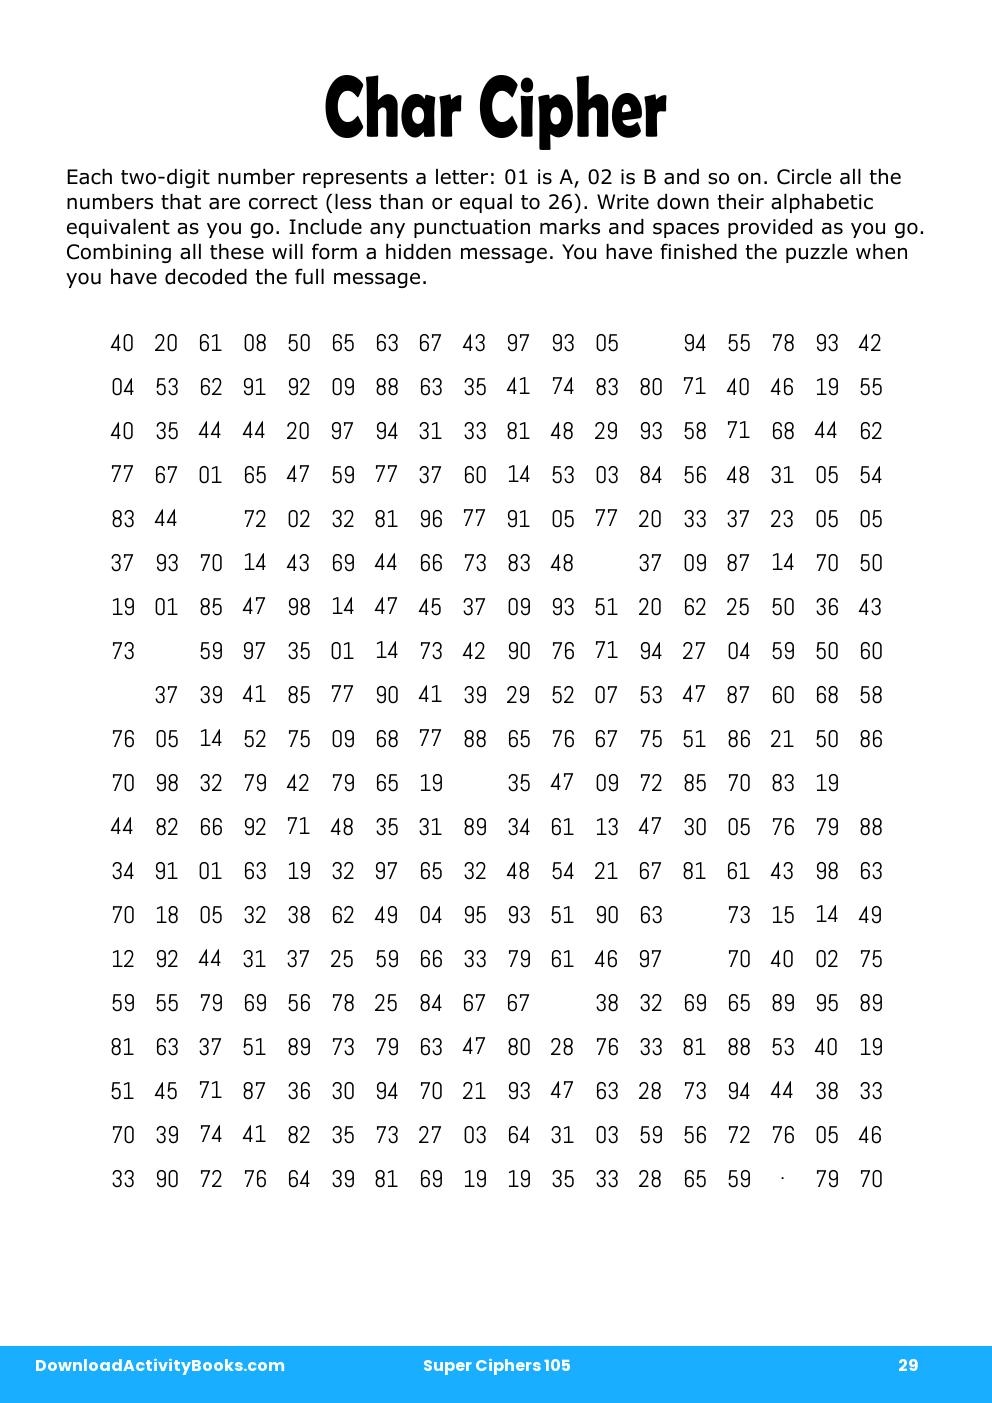 Char Cipher in Super Ciphers 105